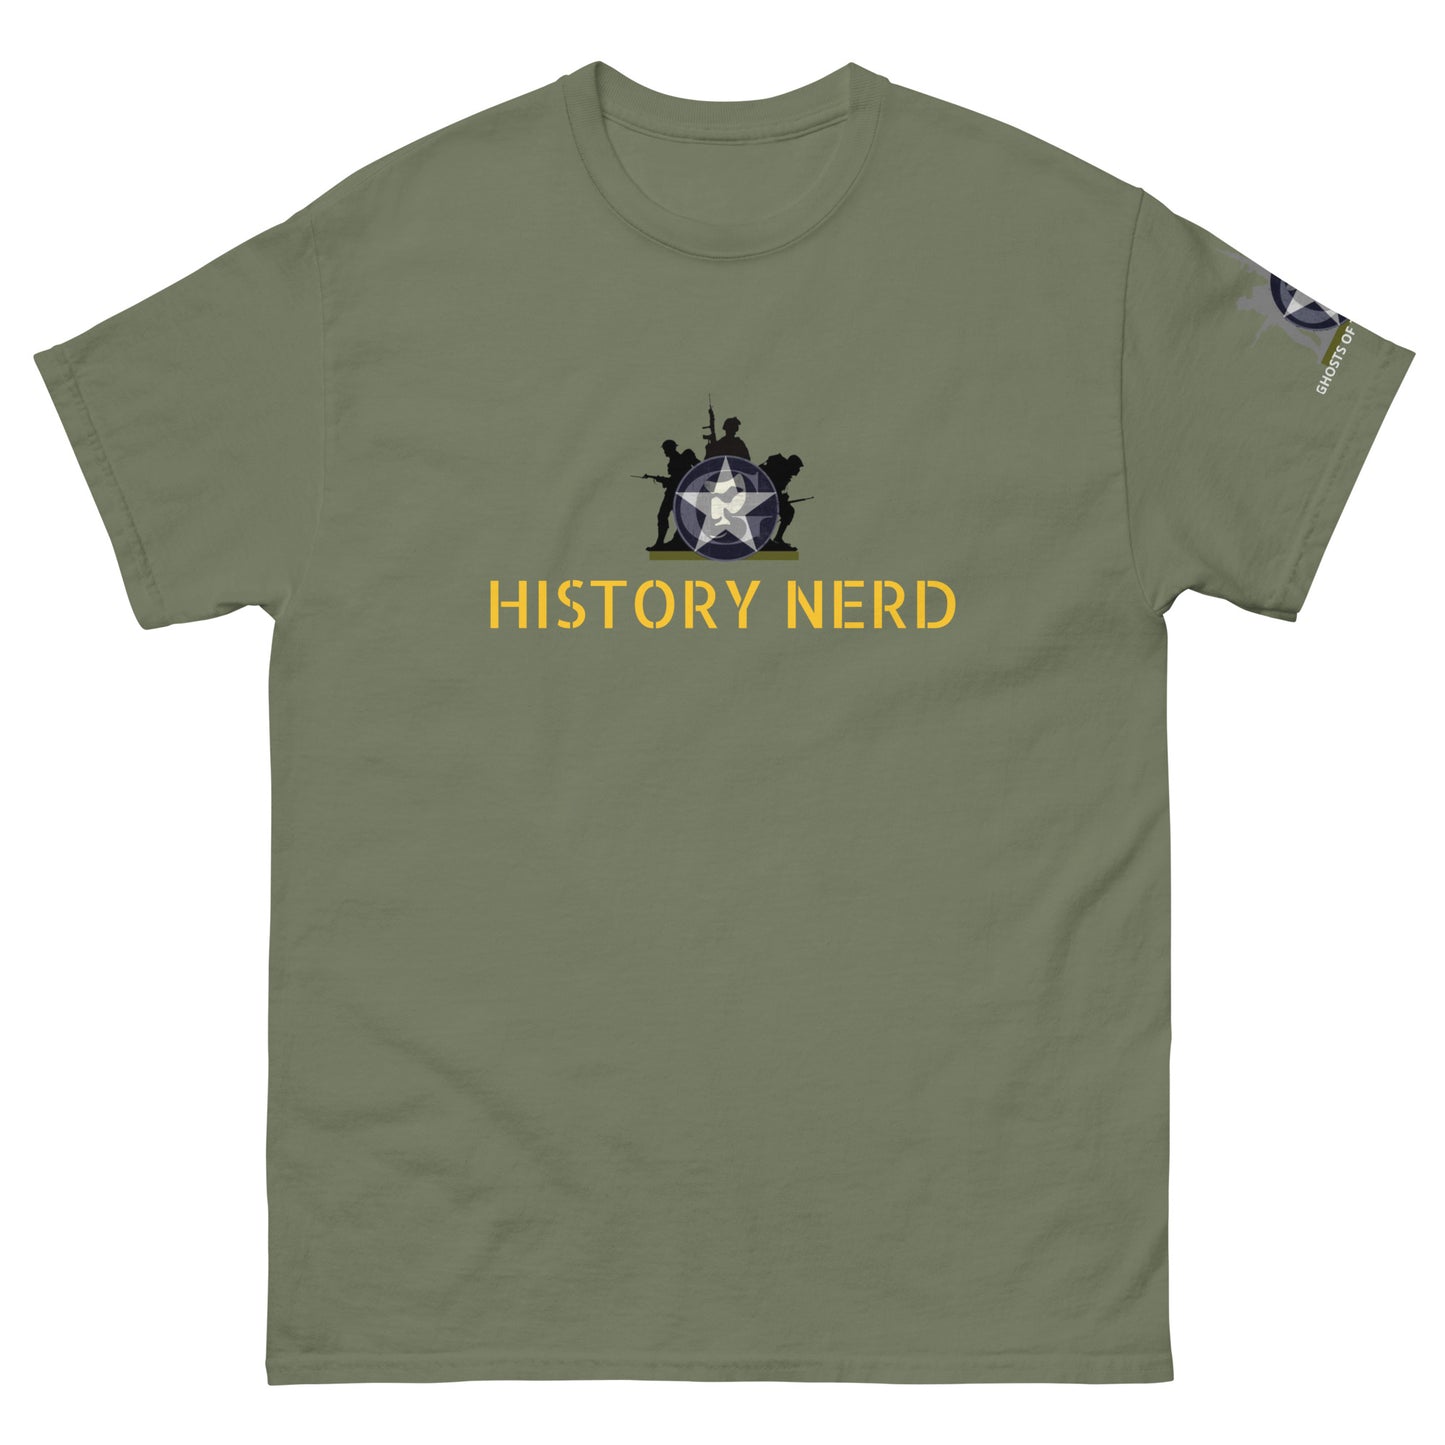 Ghosts of the Battlefied "History Nerd" T-Shirt